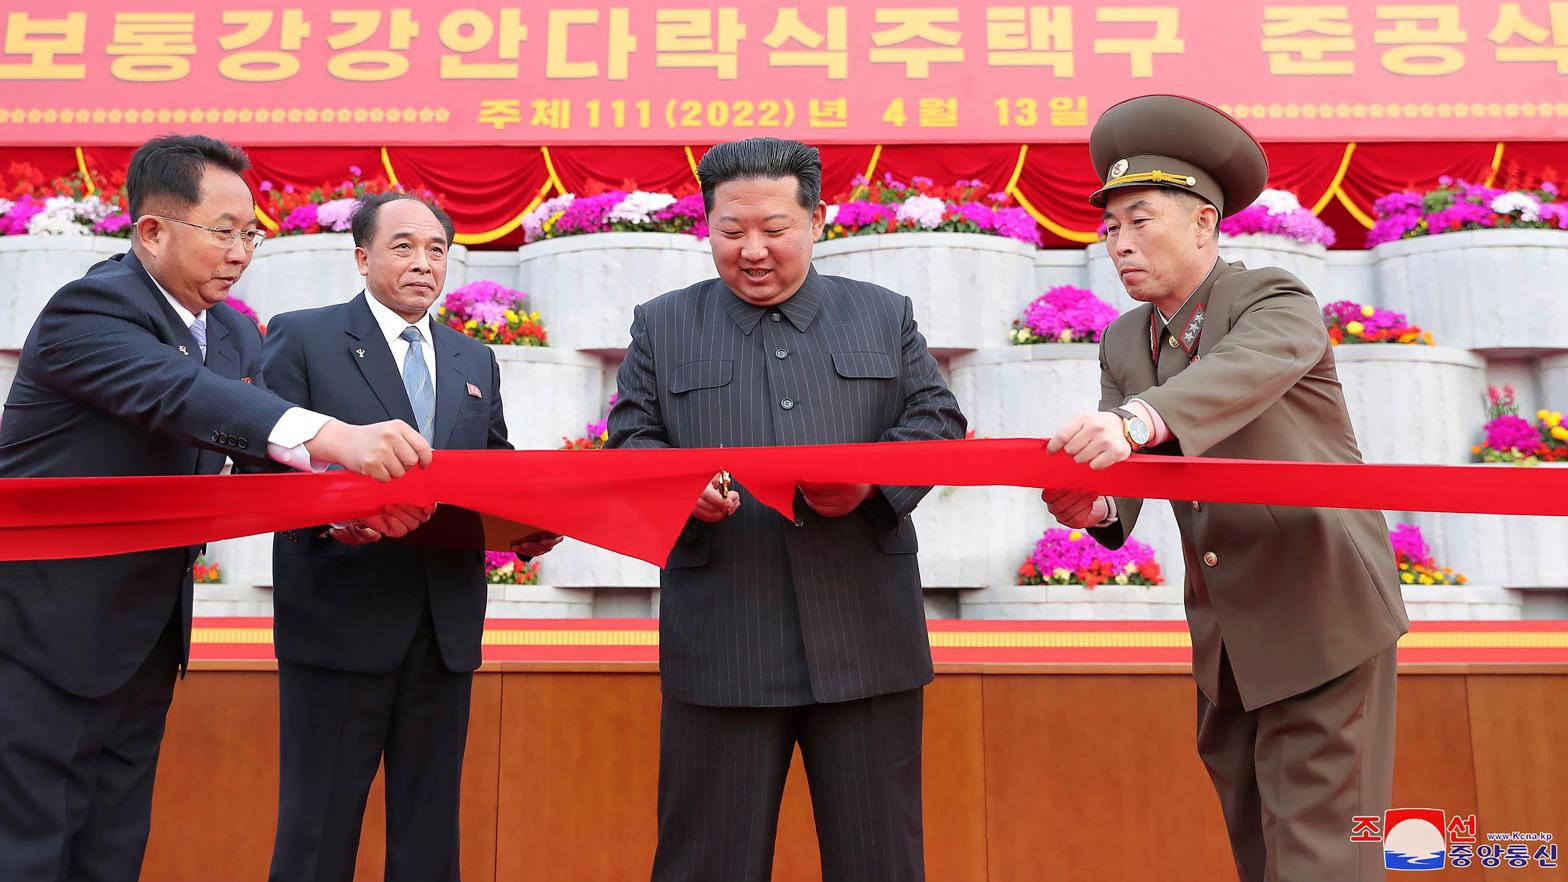 Kim Jong Un, second right, cuts the ribbon during an inauguration ceremony of Pothong riverside terraced residential district in Pyongyang, North Korea on April 13, 2022. (Photo: Korean Central News Agency/Korea News Service, AP)